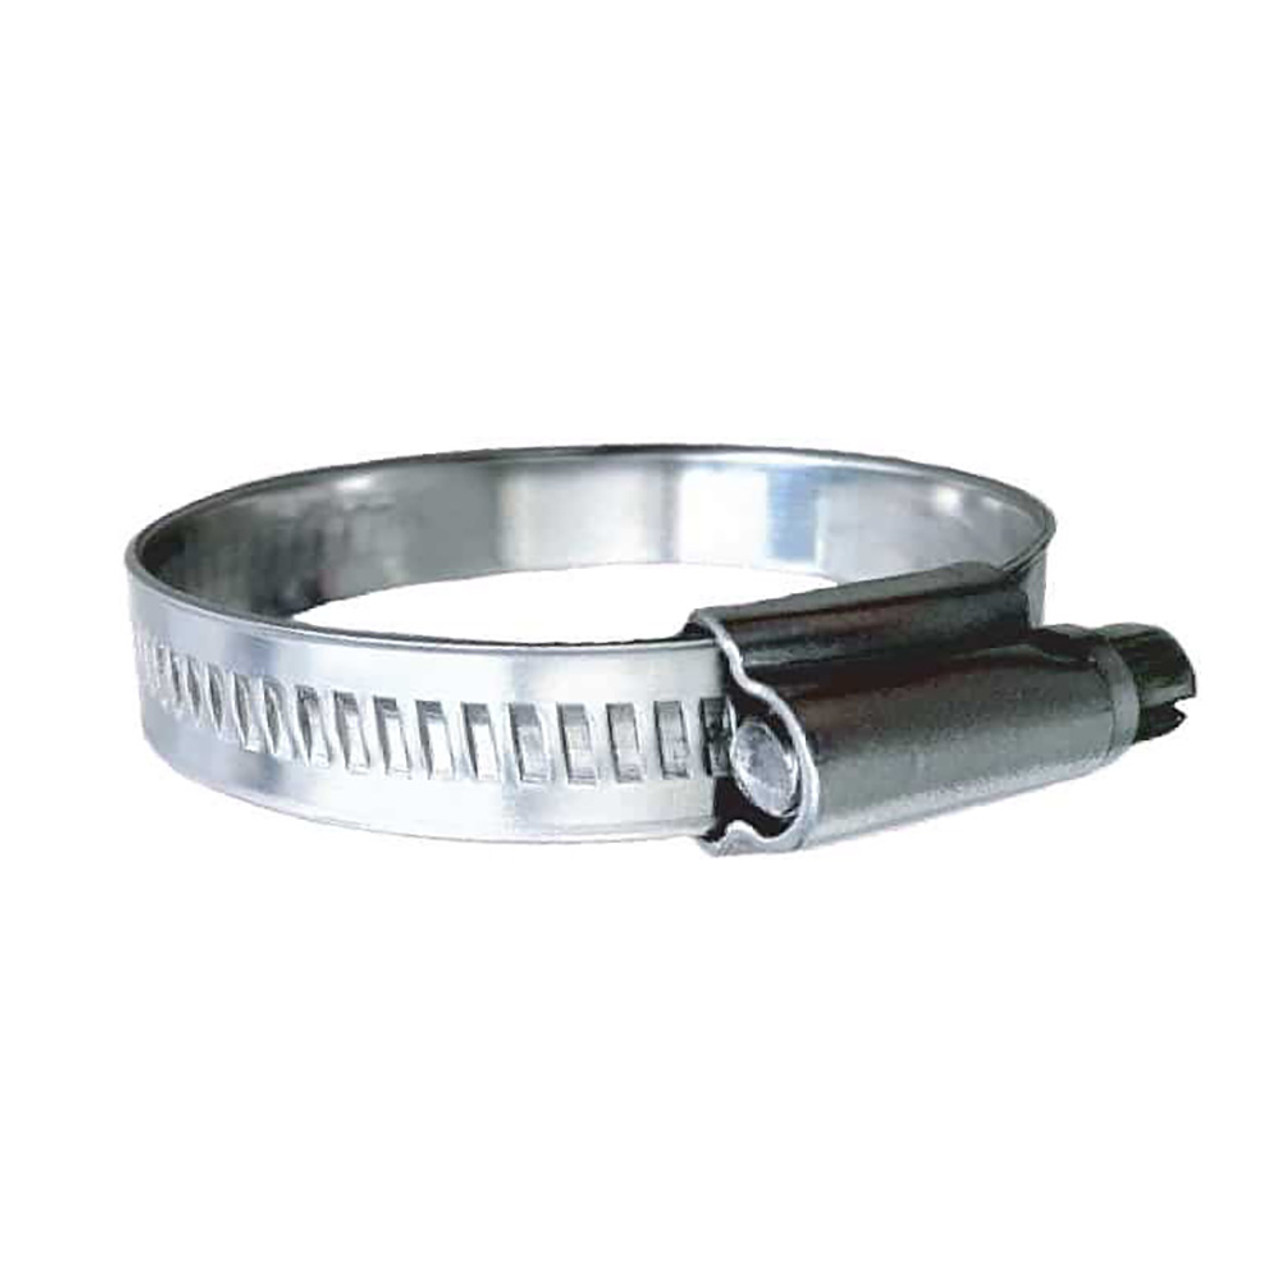 Trident Marine 316 SS Non-Perforated Worm Gear Hose Clamp - 15\/32" Band - (2" - 2-9\/16") Clamping Range - 10-Pack - SAE Size 32 [710-2001]